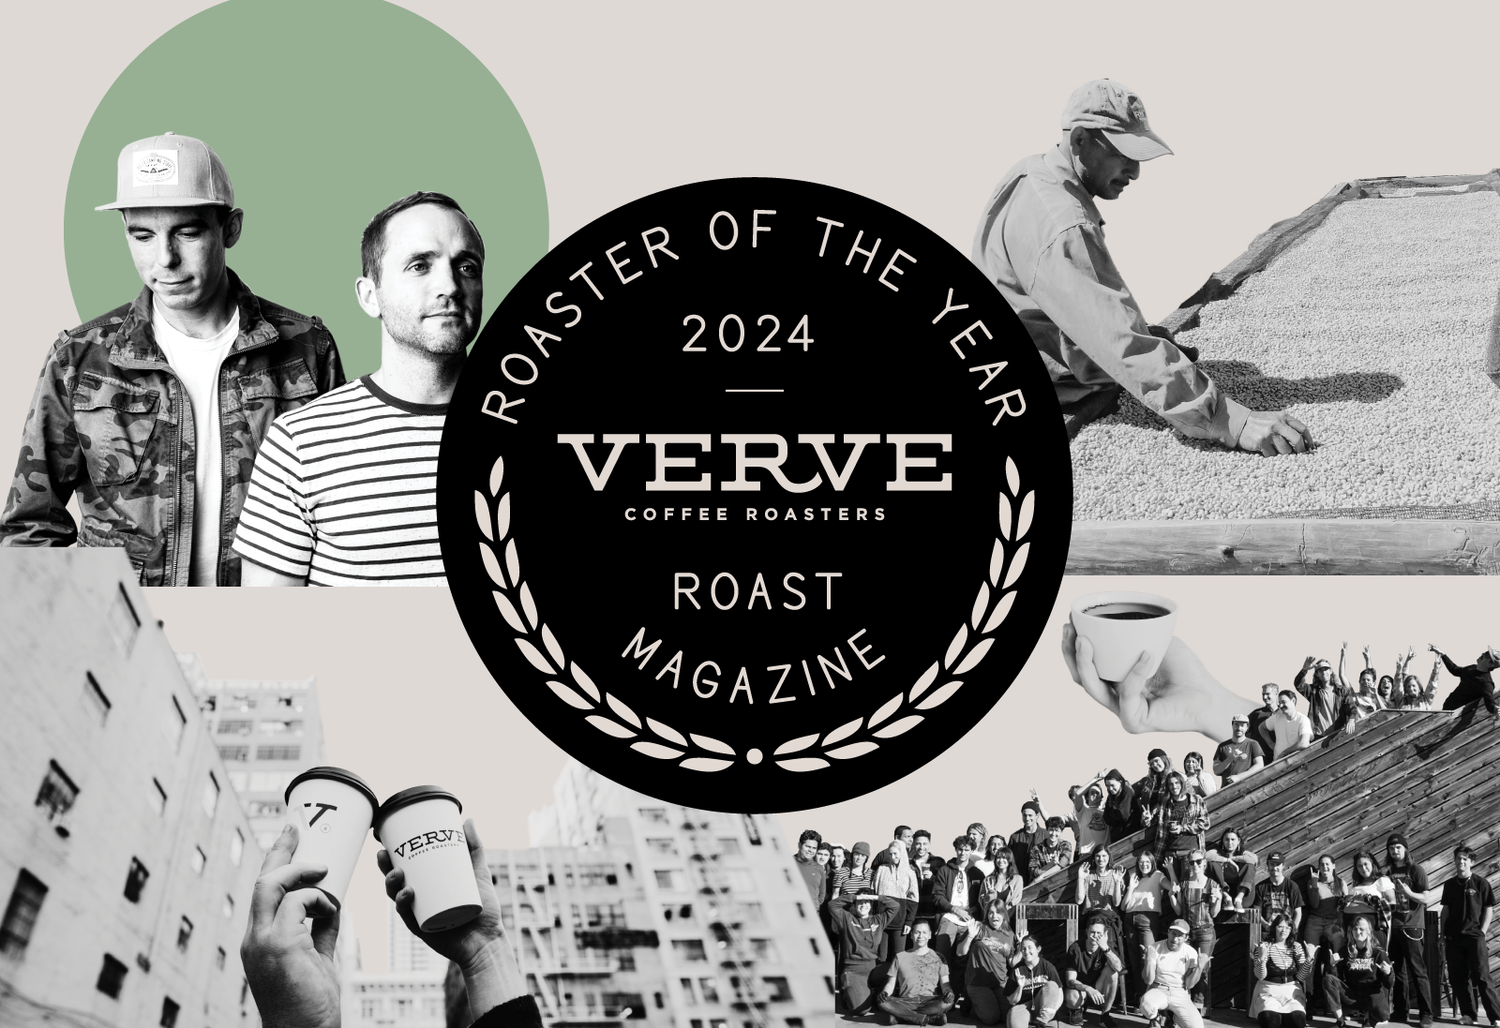 Verve Coffee Roasters - Roaster of the Year 2024